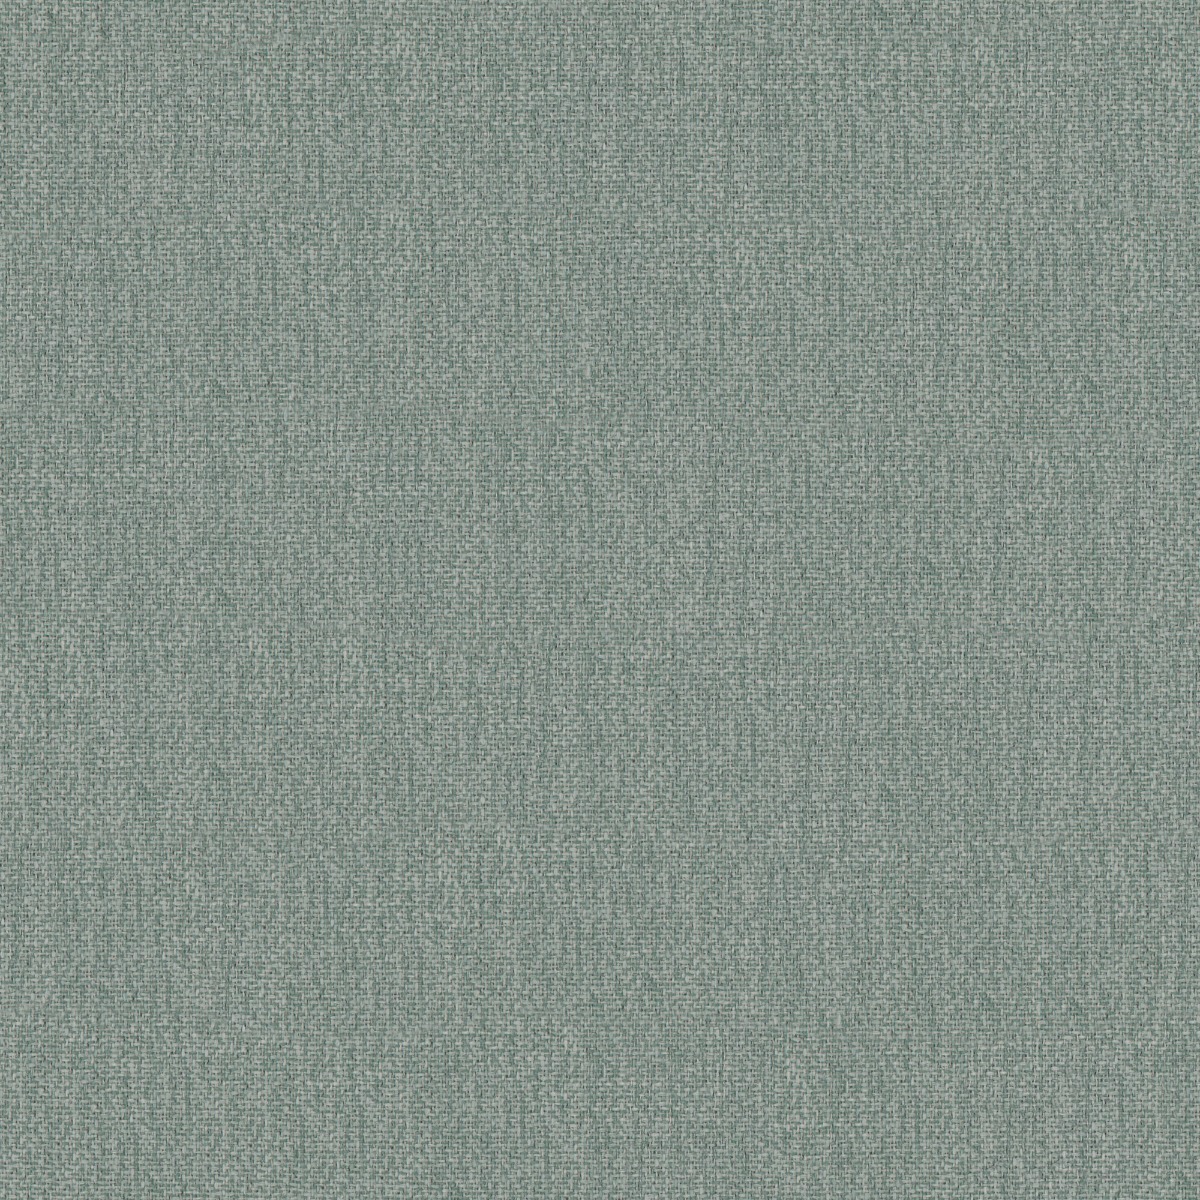 A seamless fabric texture with plain green dimout units arranged in a None pattern